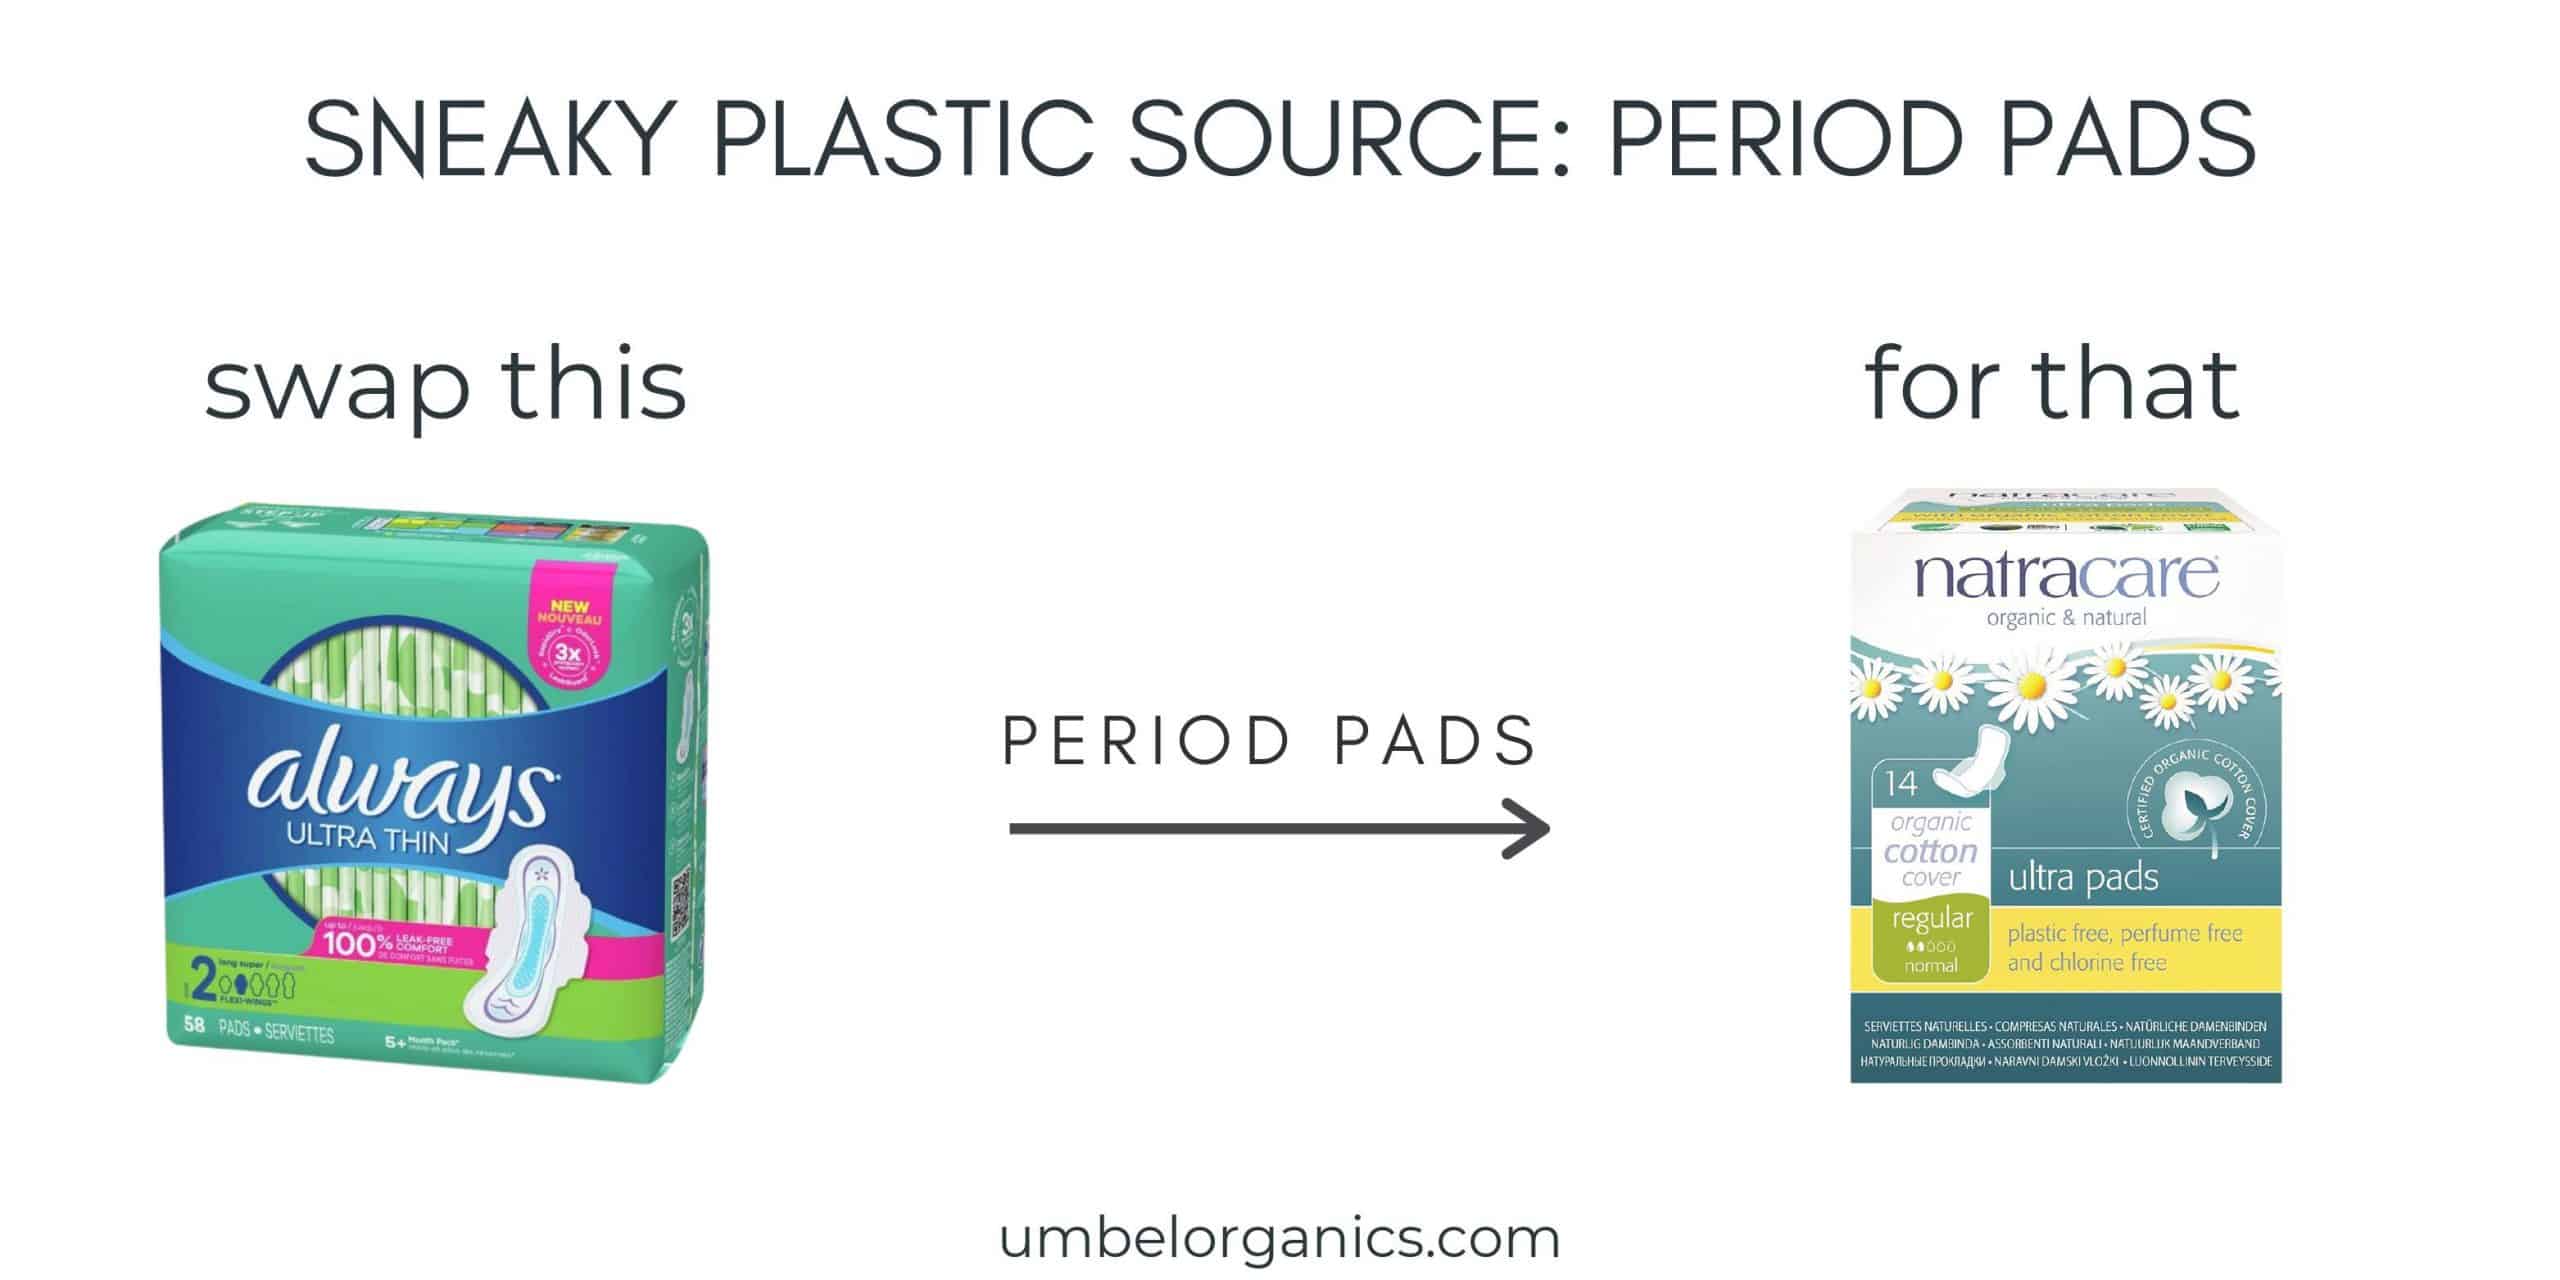 Conventional period pads and organic cotton period pads